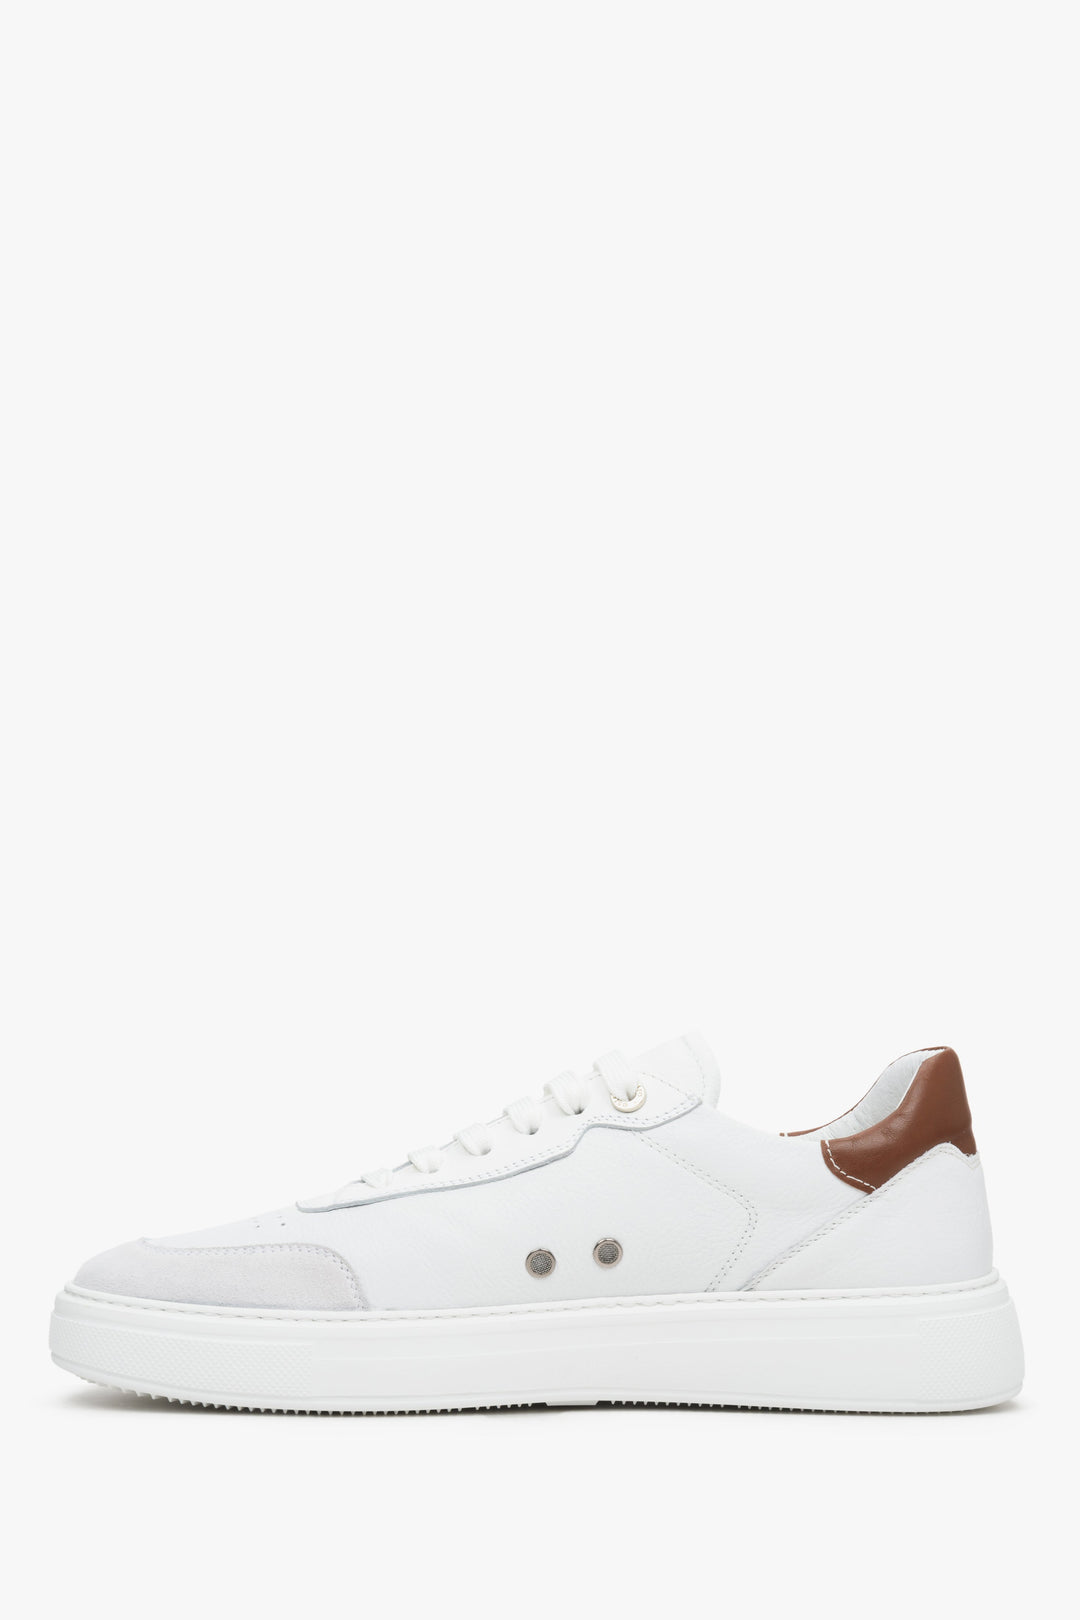 Men's casual sneakers in white with brown elements - shoe profile.